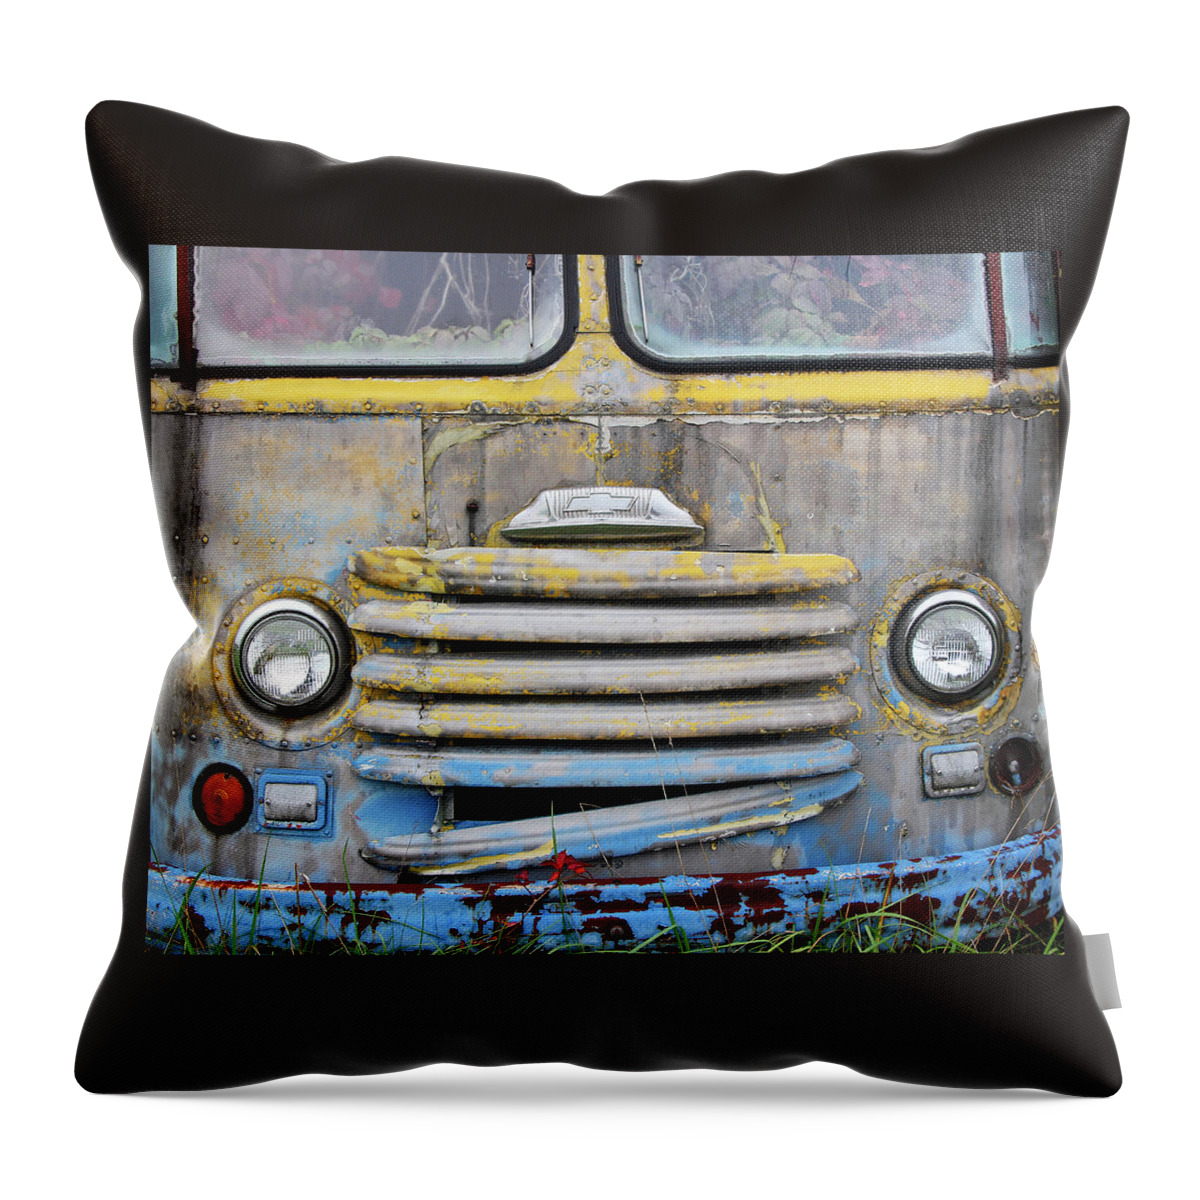 Old Throw Pillow featuring the photograph The Old Grungy Truck That Looks Like A Face by Allen Beatty